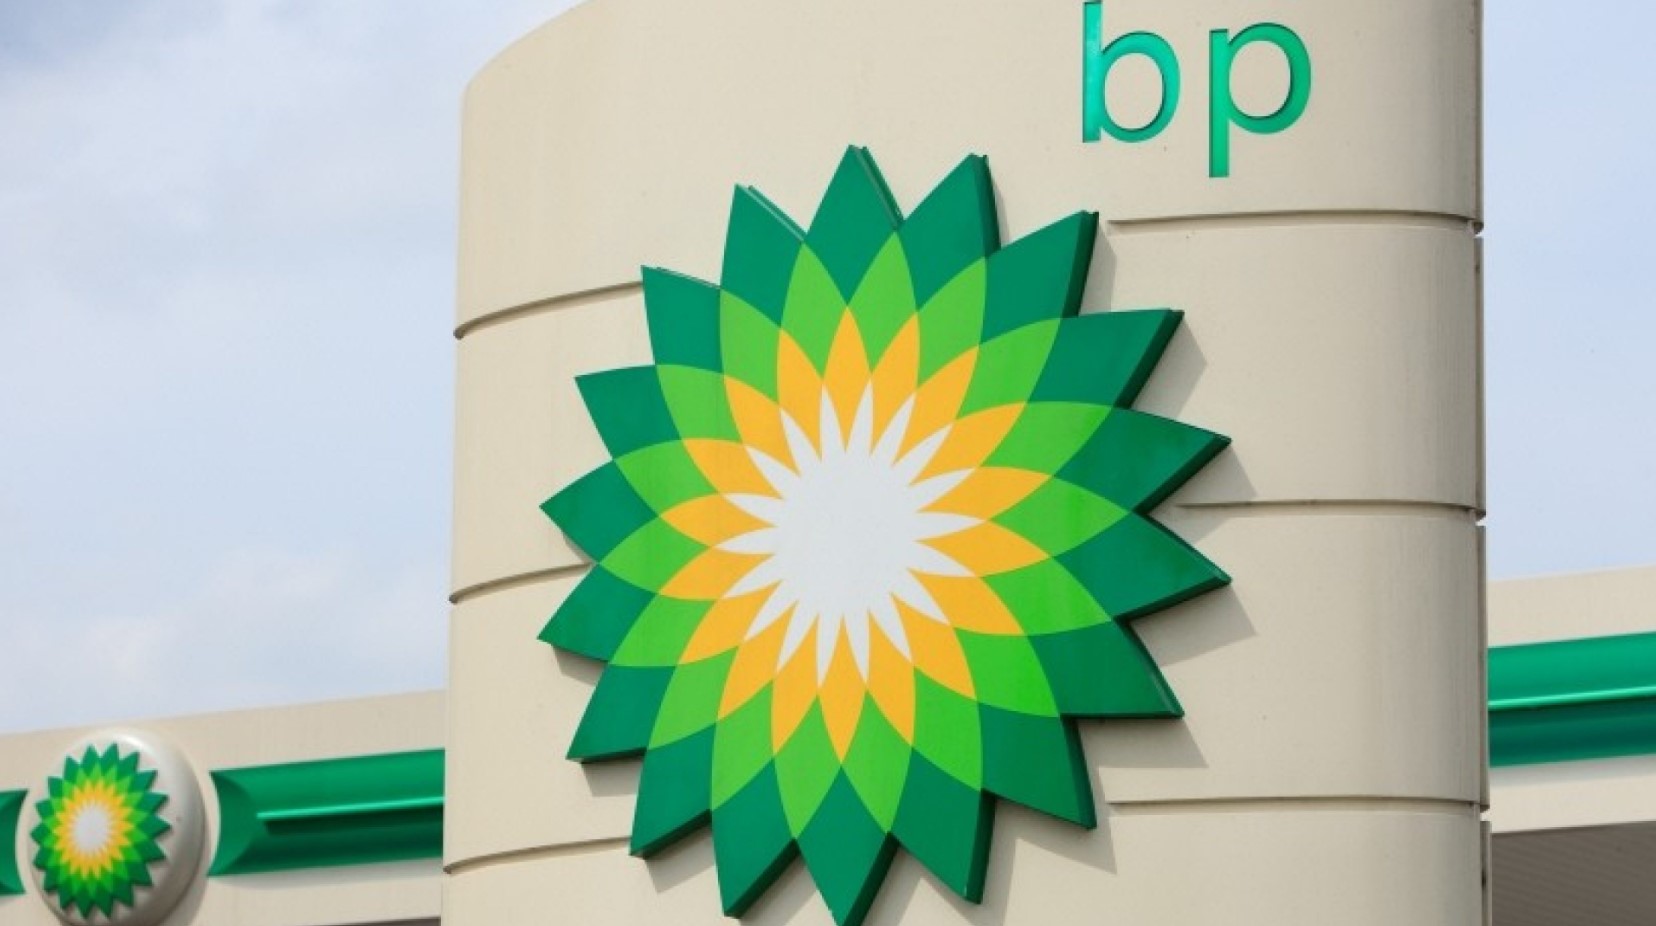 A photo of BP logo on one of the company's stations